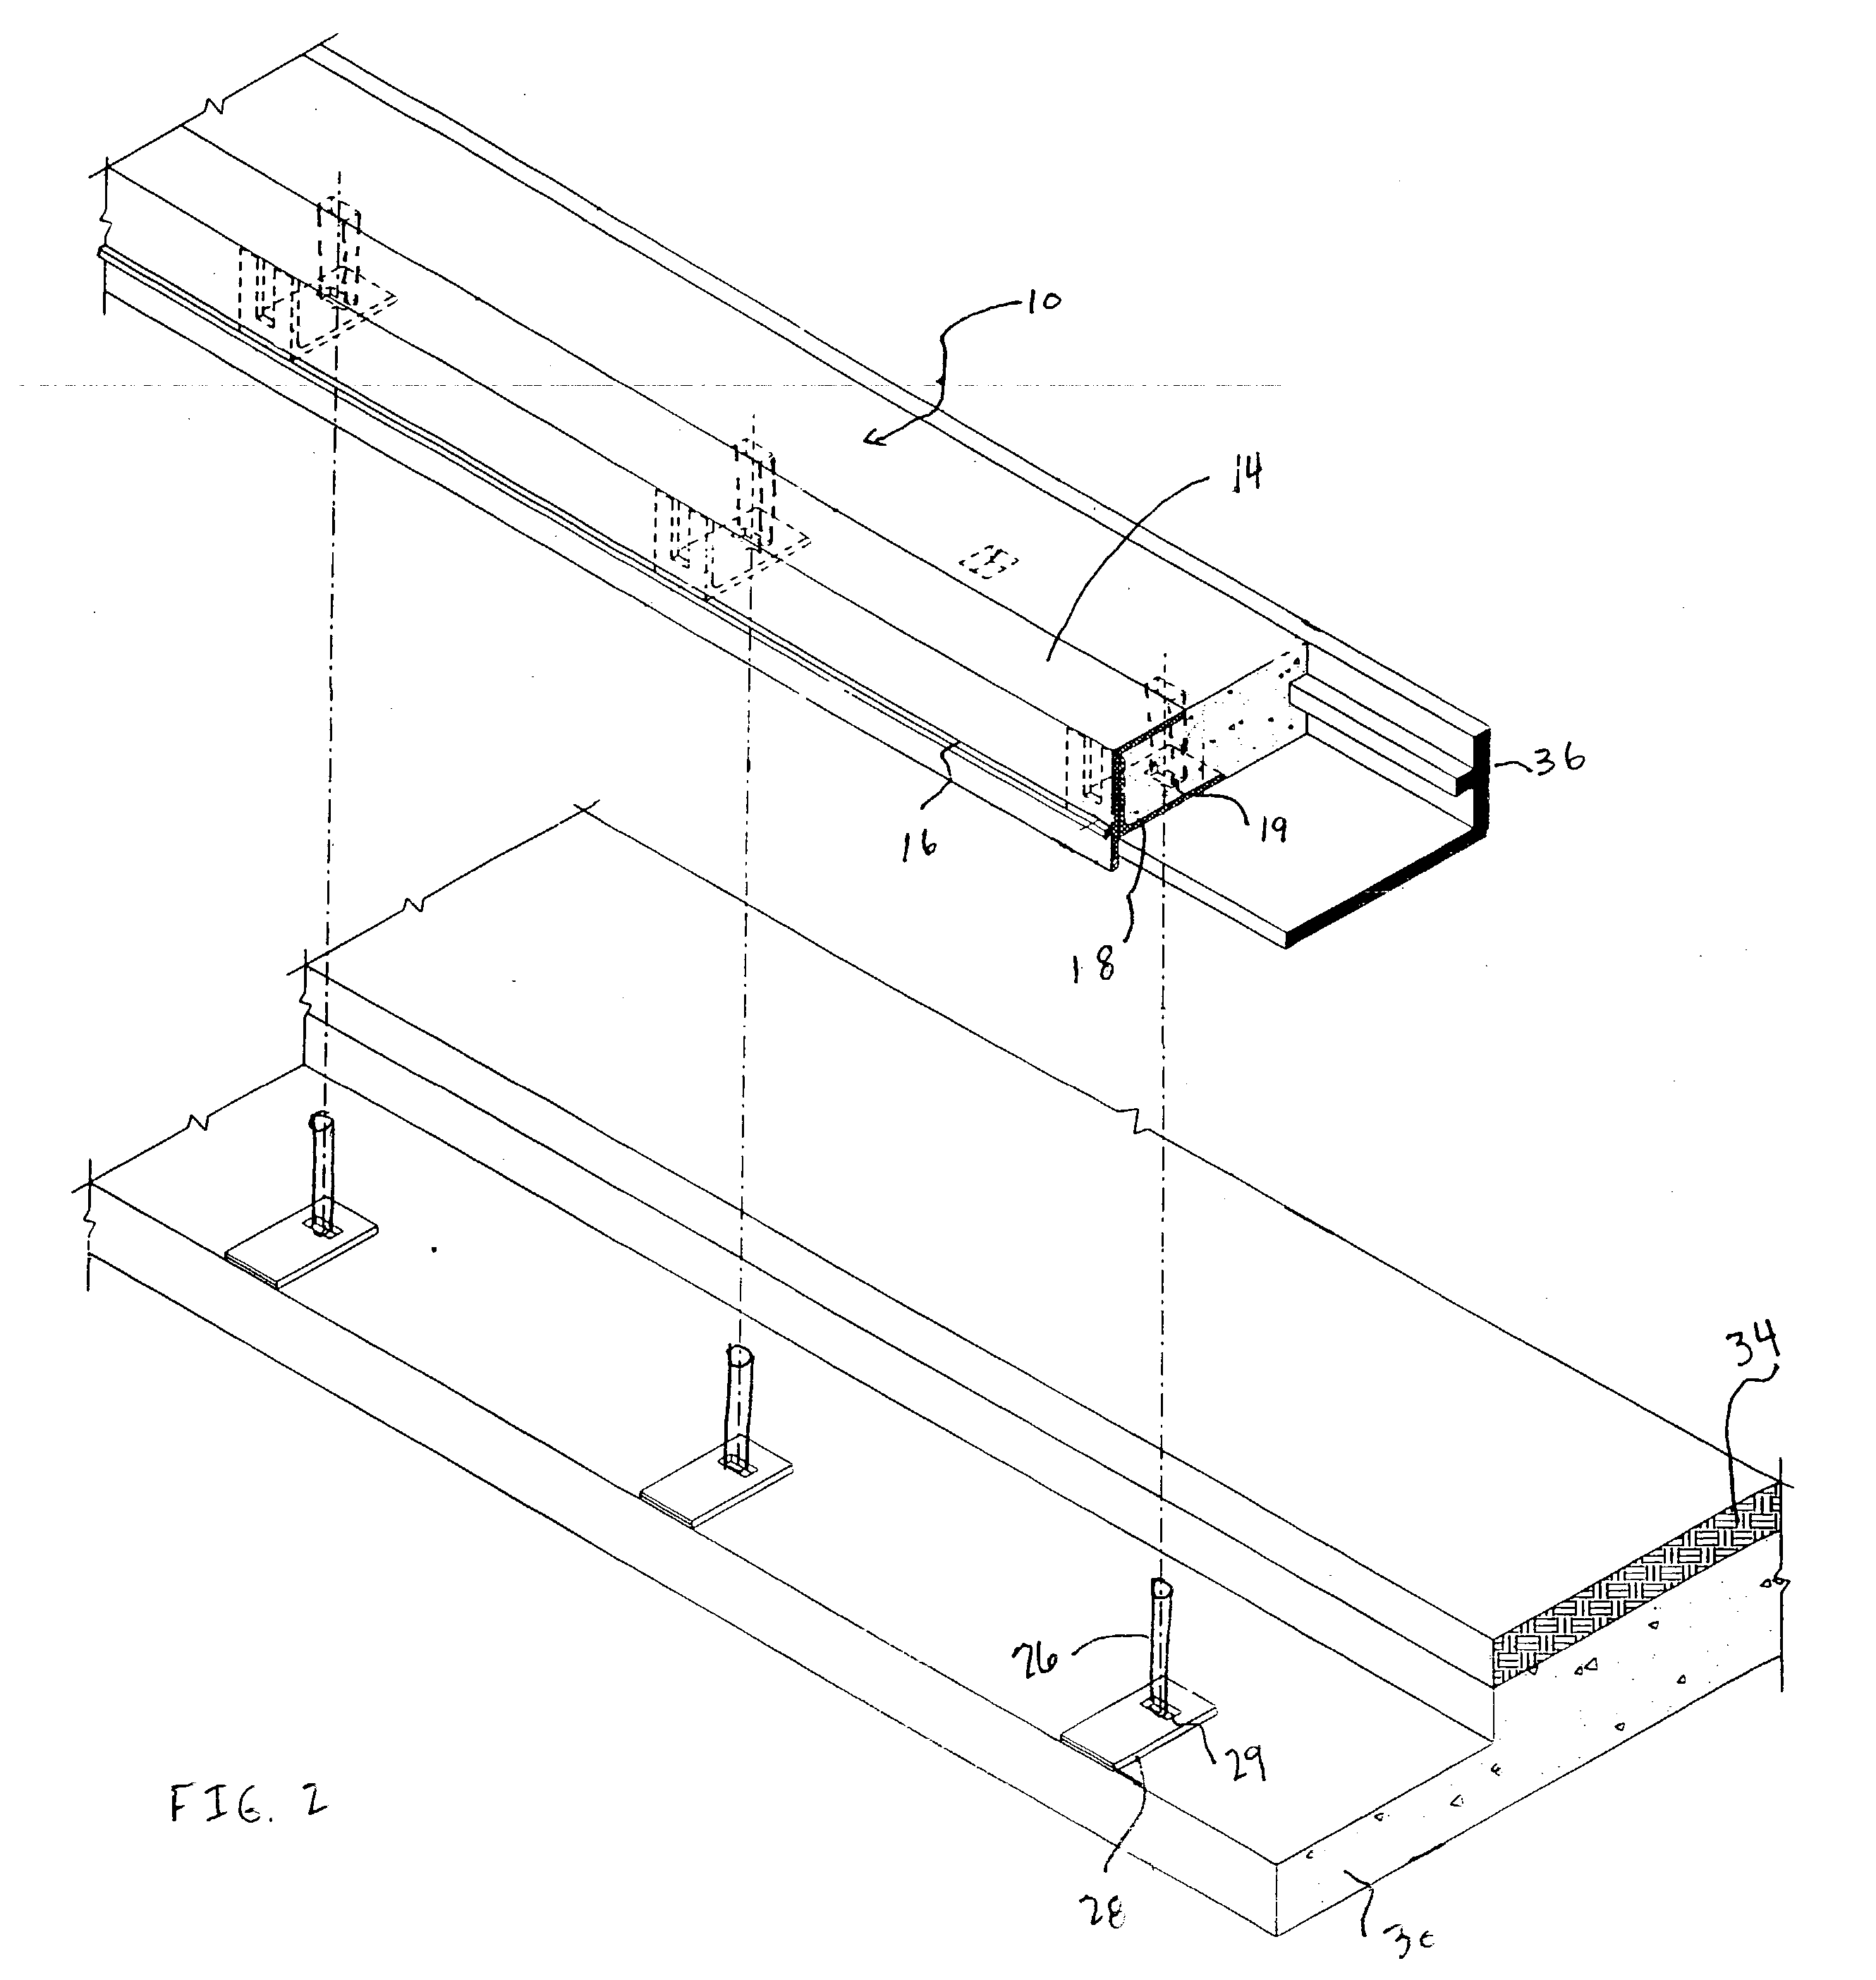 Precast composite header joint system and a method for forming and installing the same